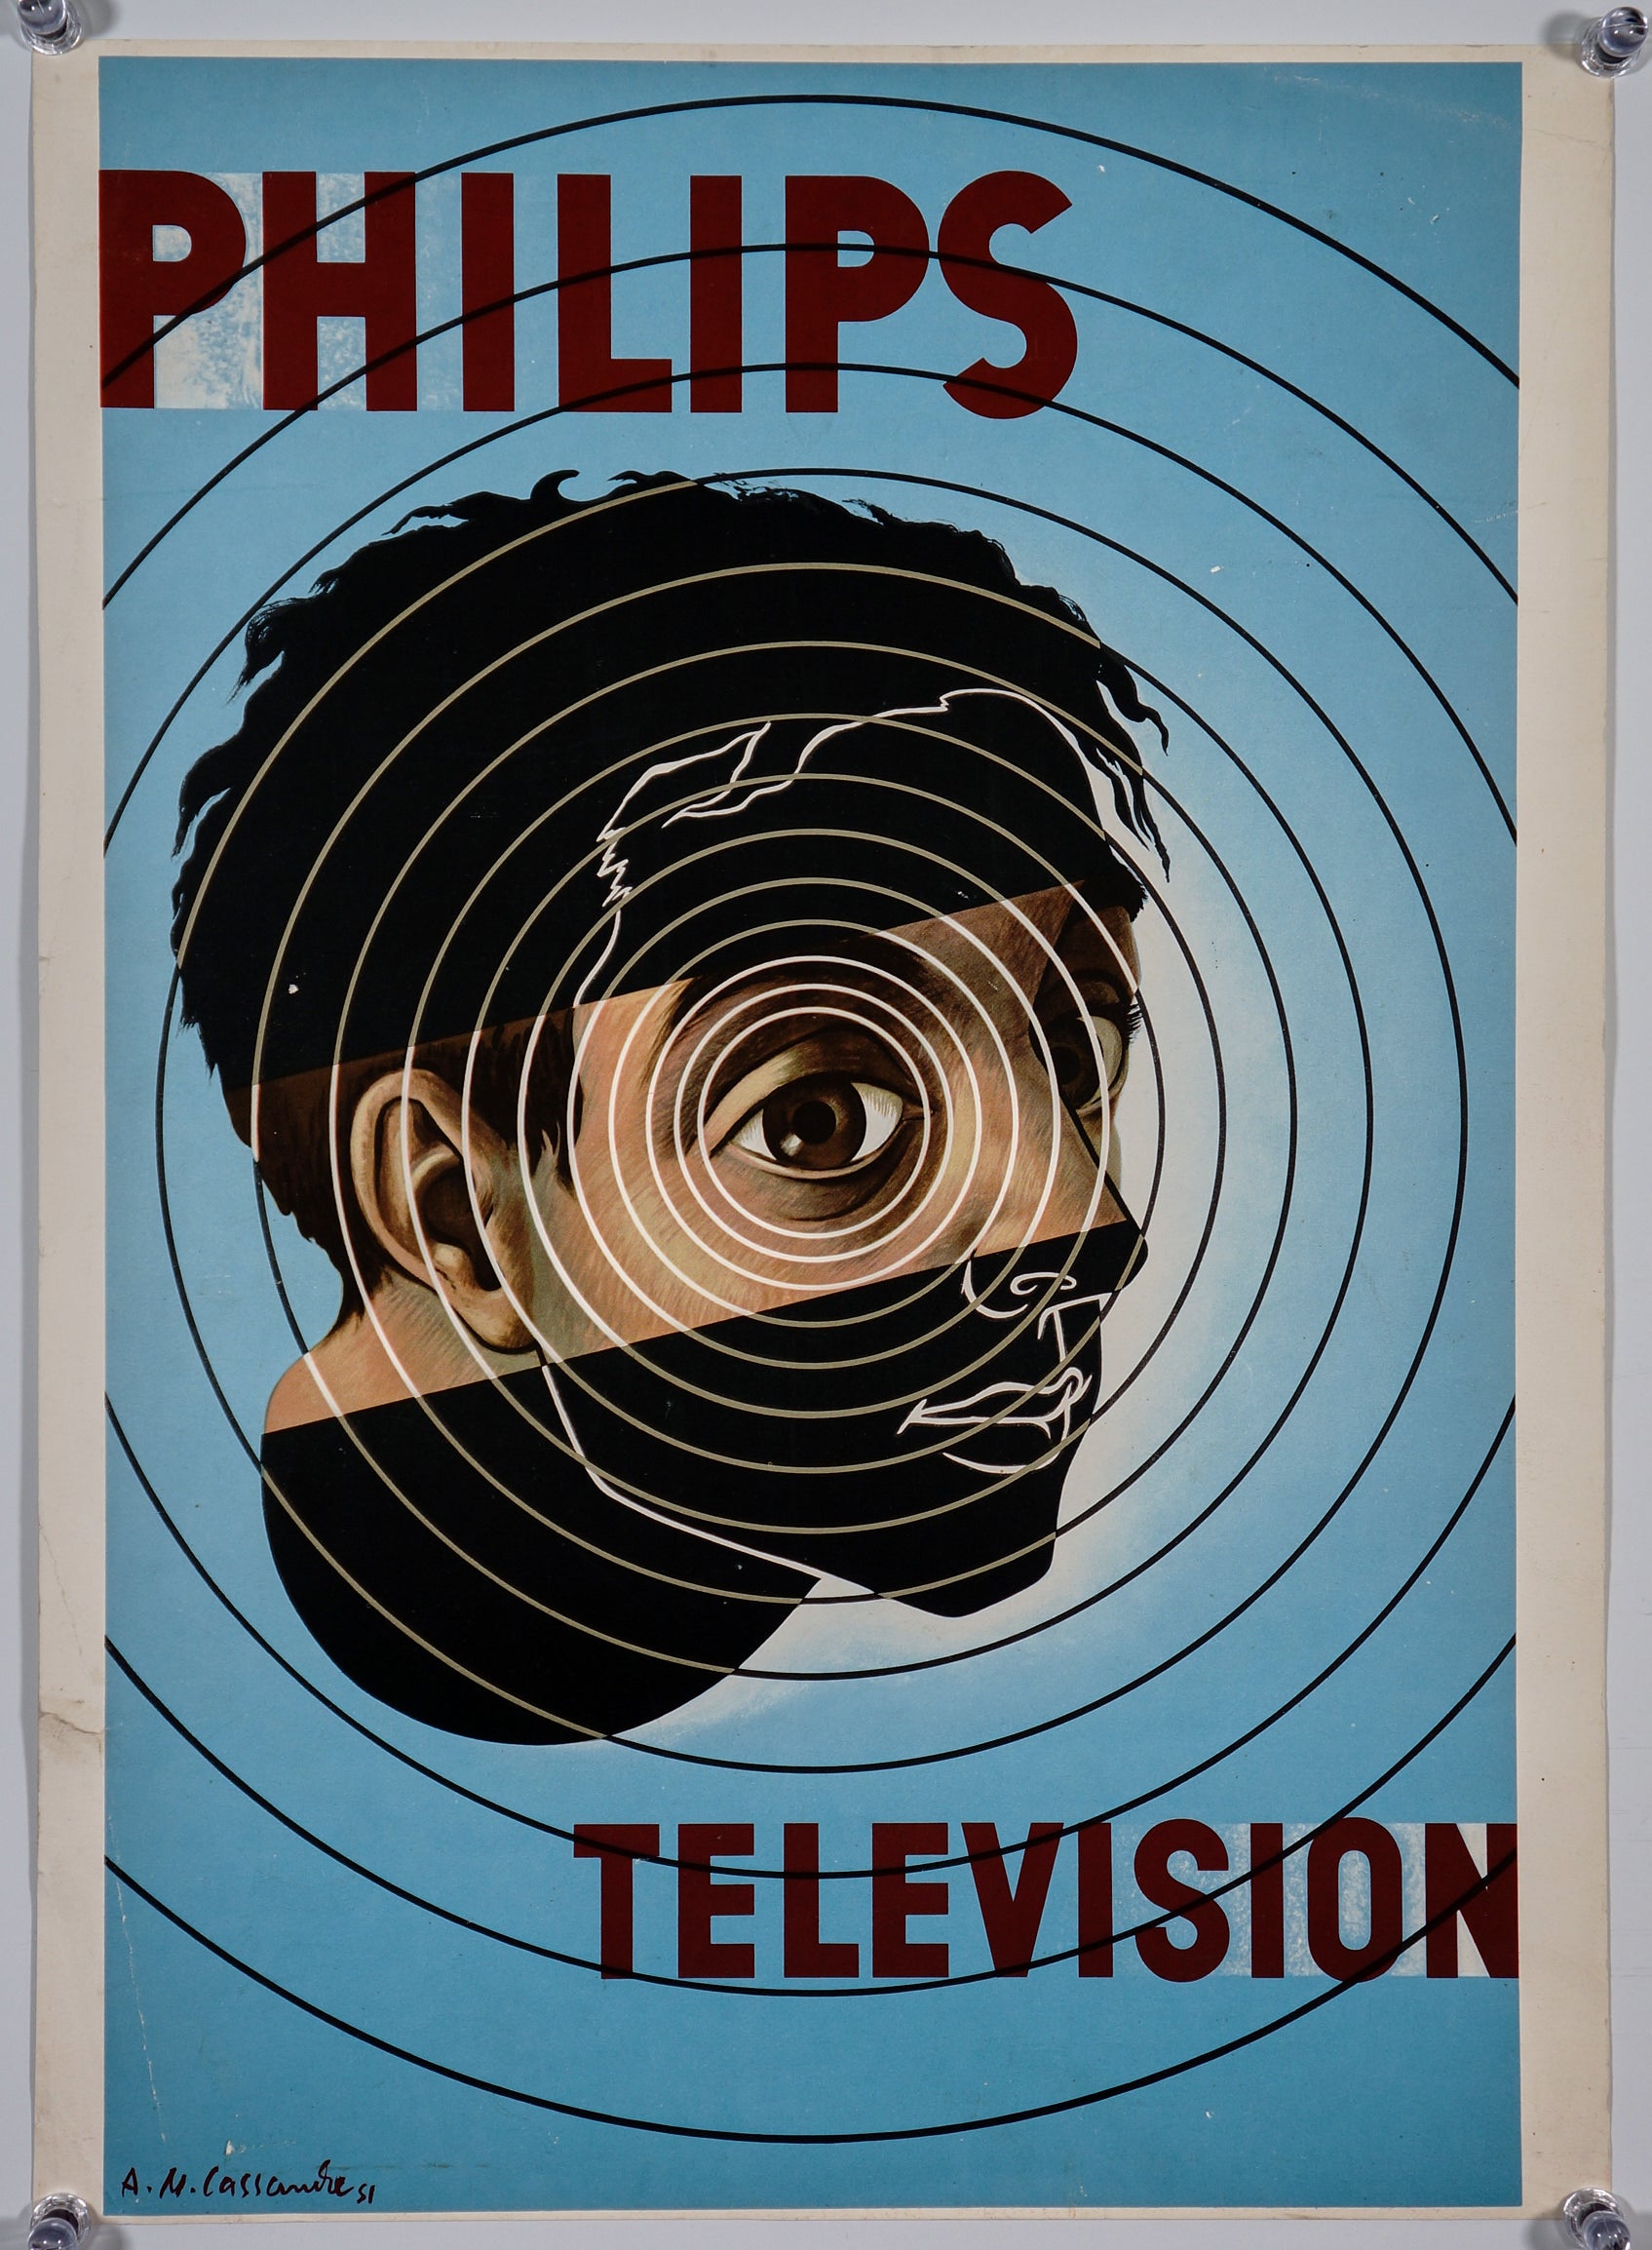 Authentic Vintage Window | Philips Television by A.M. Cassandre